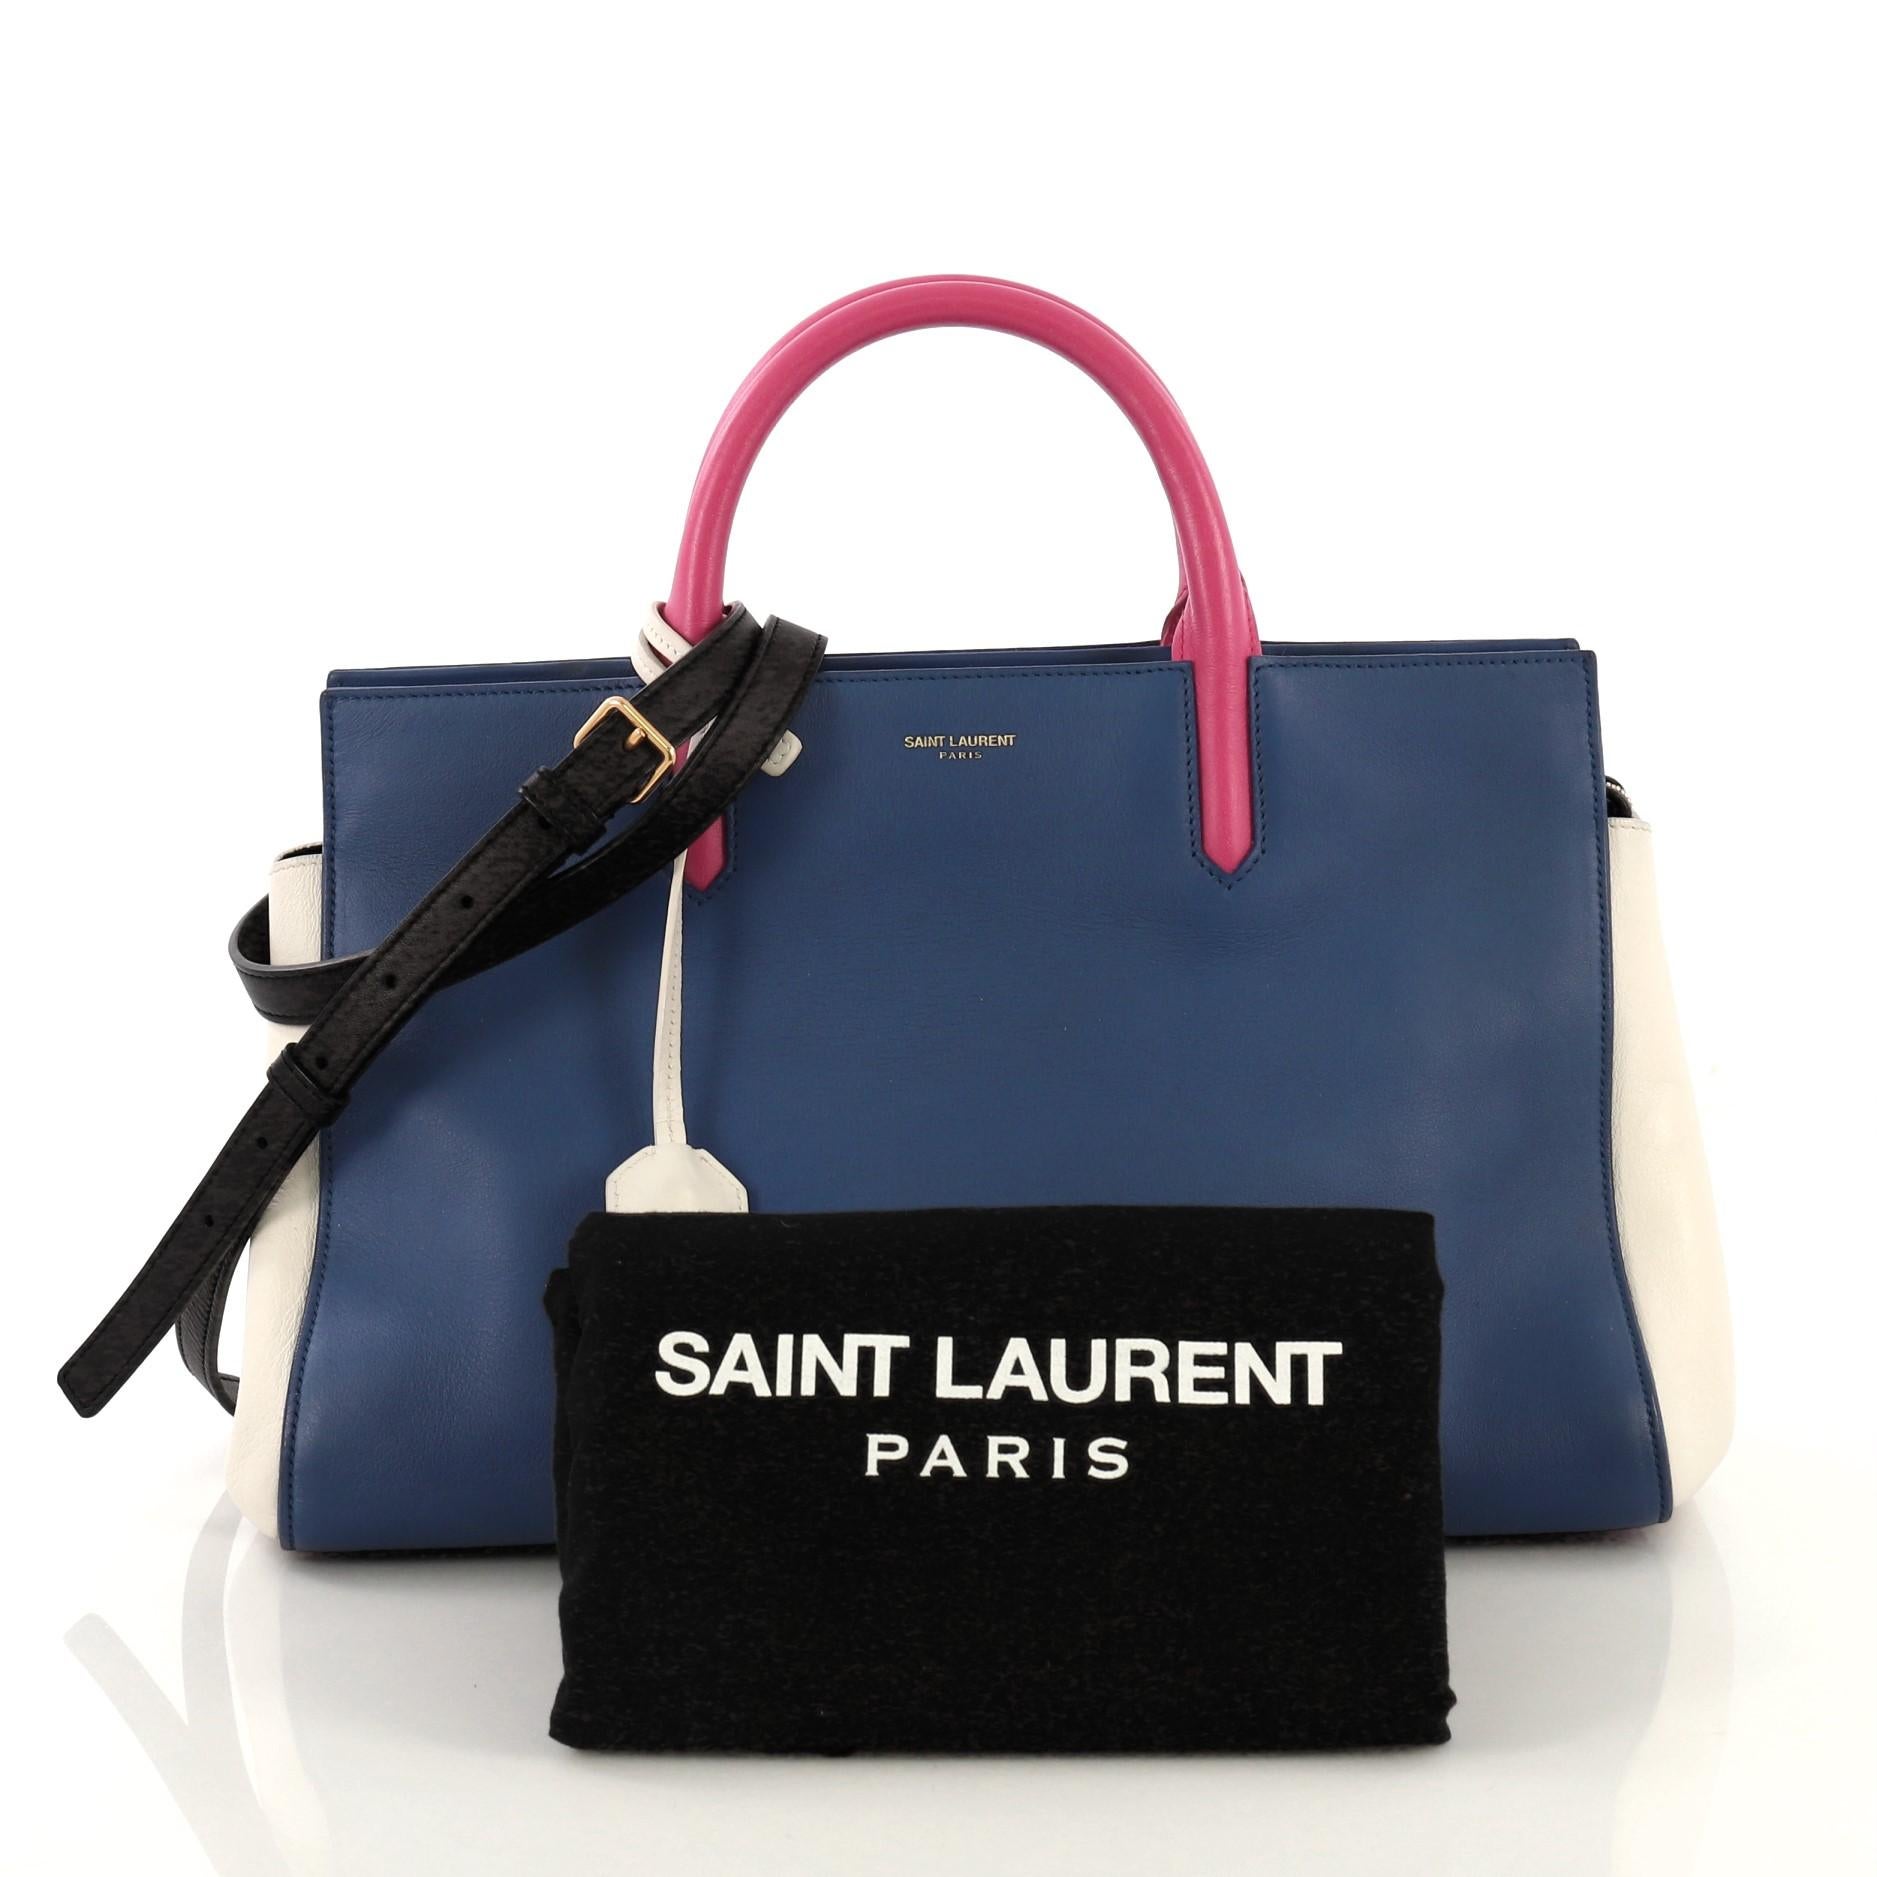 This Saint Laurent Rive Gauche Cabas Leather Small, crafted from blue and white leather, features dual rolled leather handles, protective base studs, side snap buttons, and gold-tone hardware. Its zip closure opens to a black suede interior with